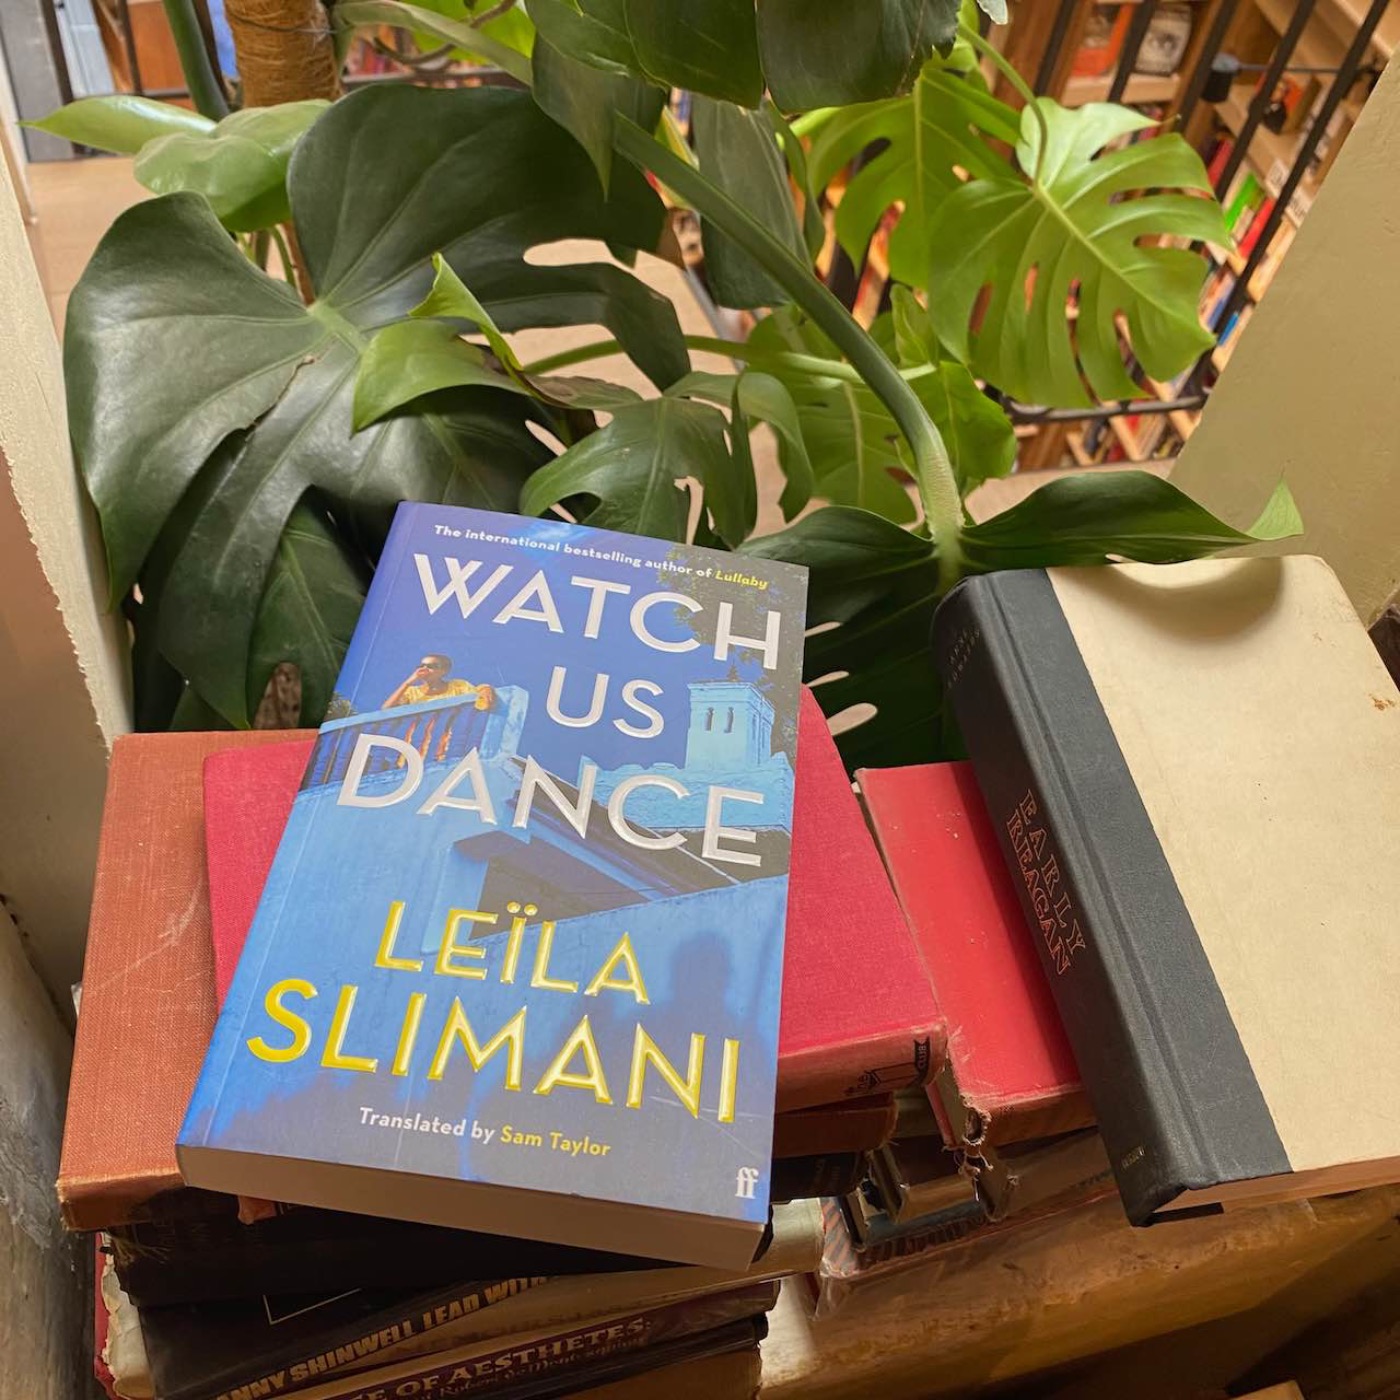 Leïla Slimani on Inheritance, Hippies and the Literature of Disappointment